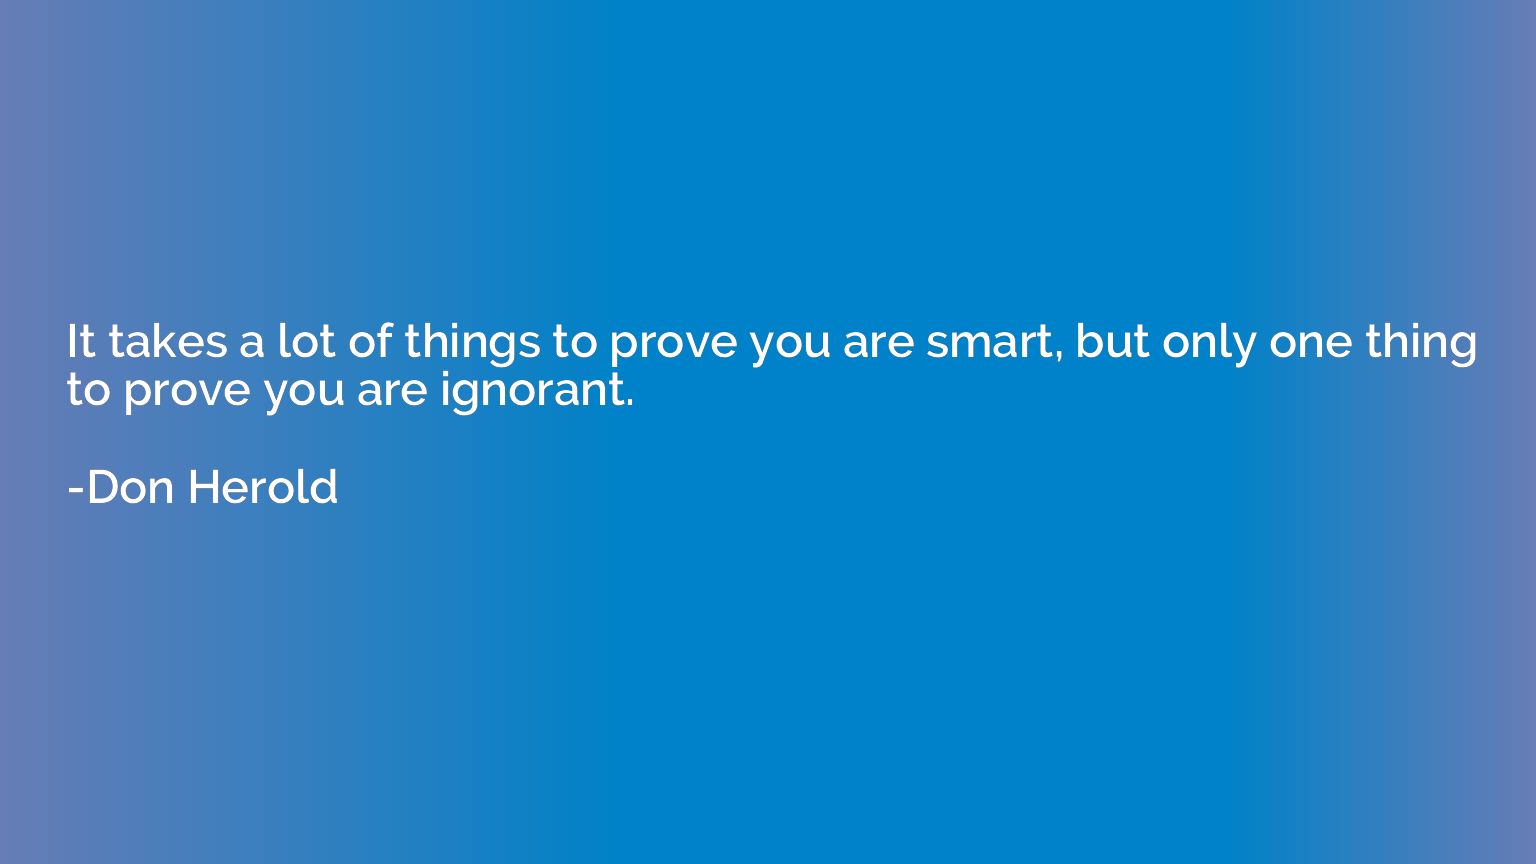 It takes a lot of things to prove you are smart, but only on